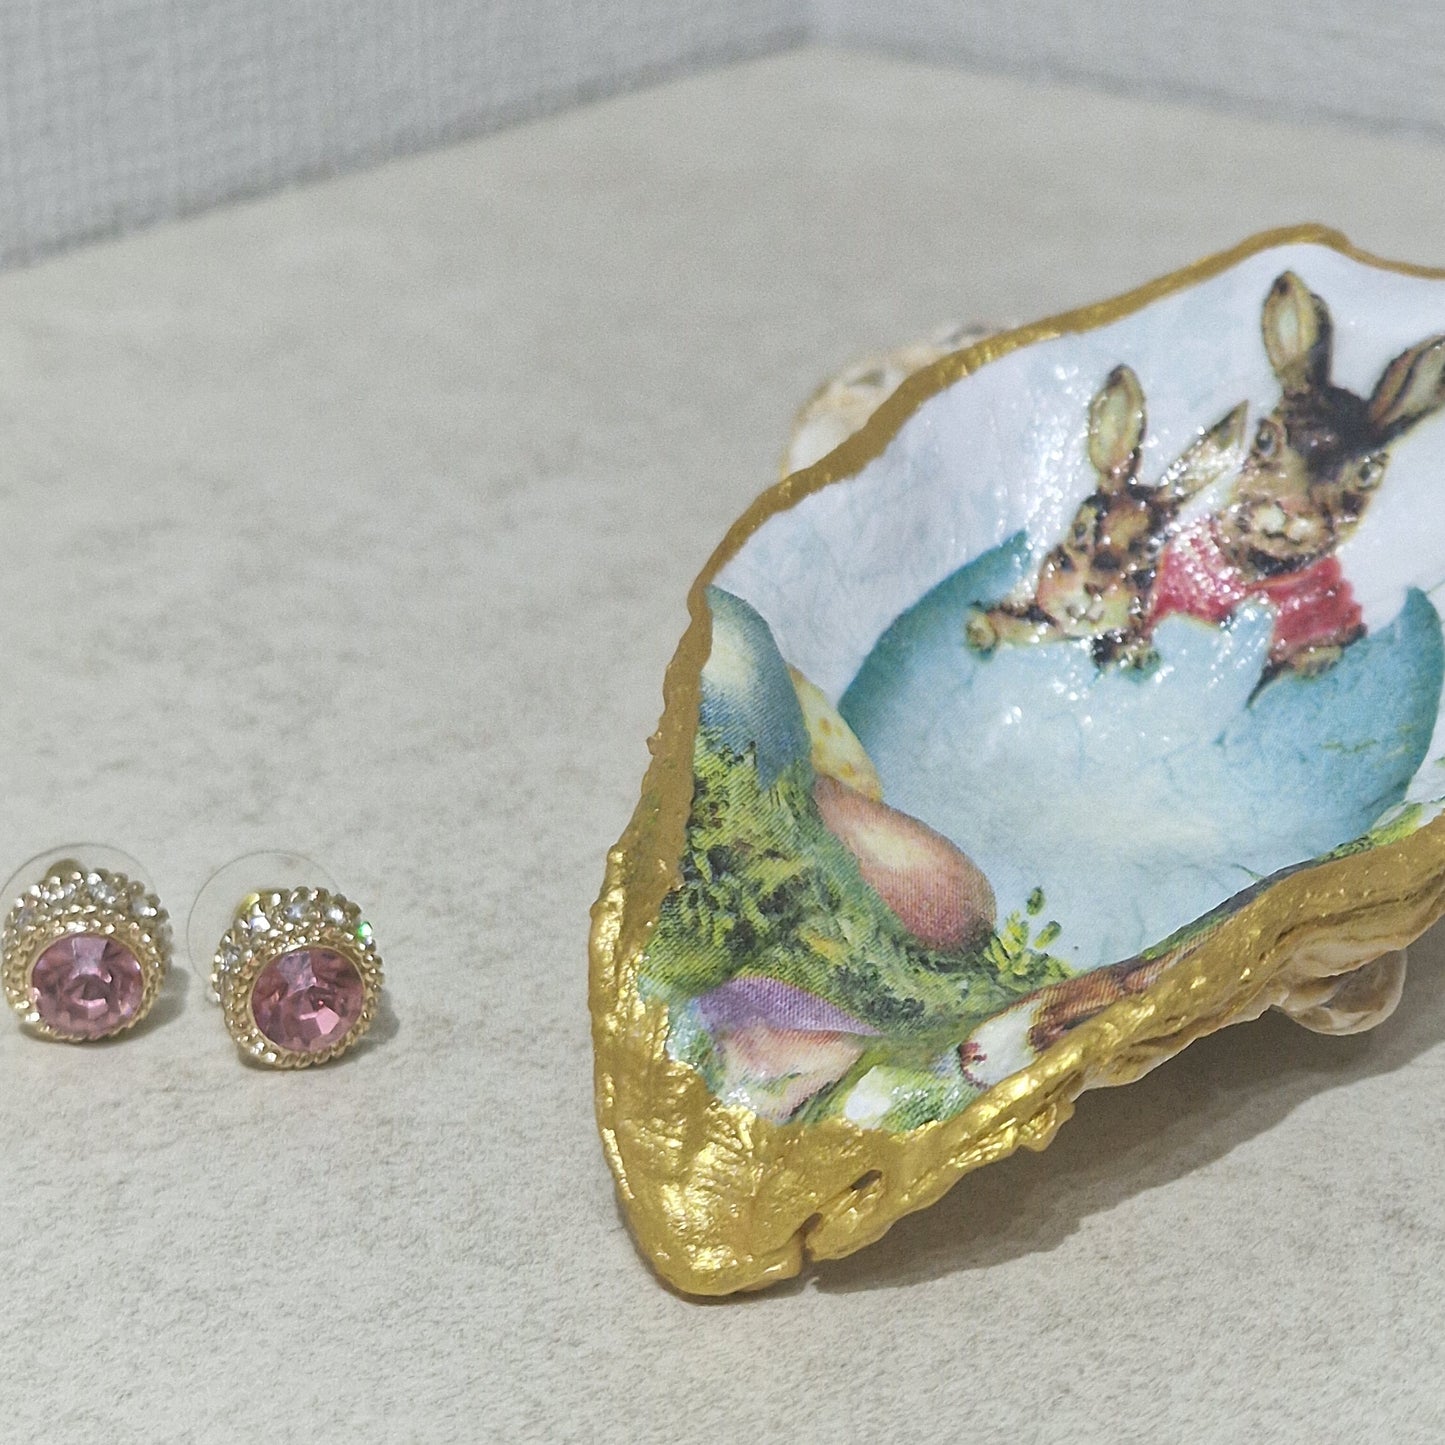 NEW Easter Bunny Bunnies Egg Oyster Shell Trinket Dish Jewellery Holder Gift